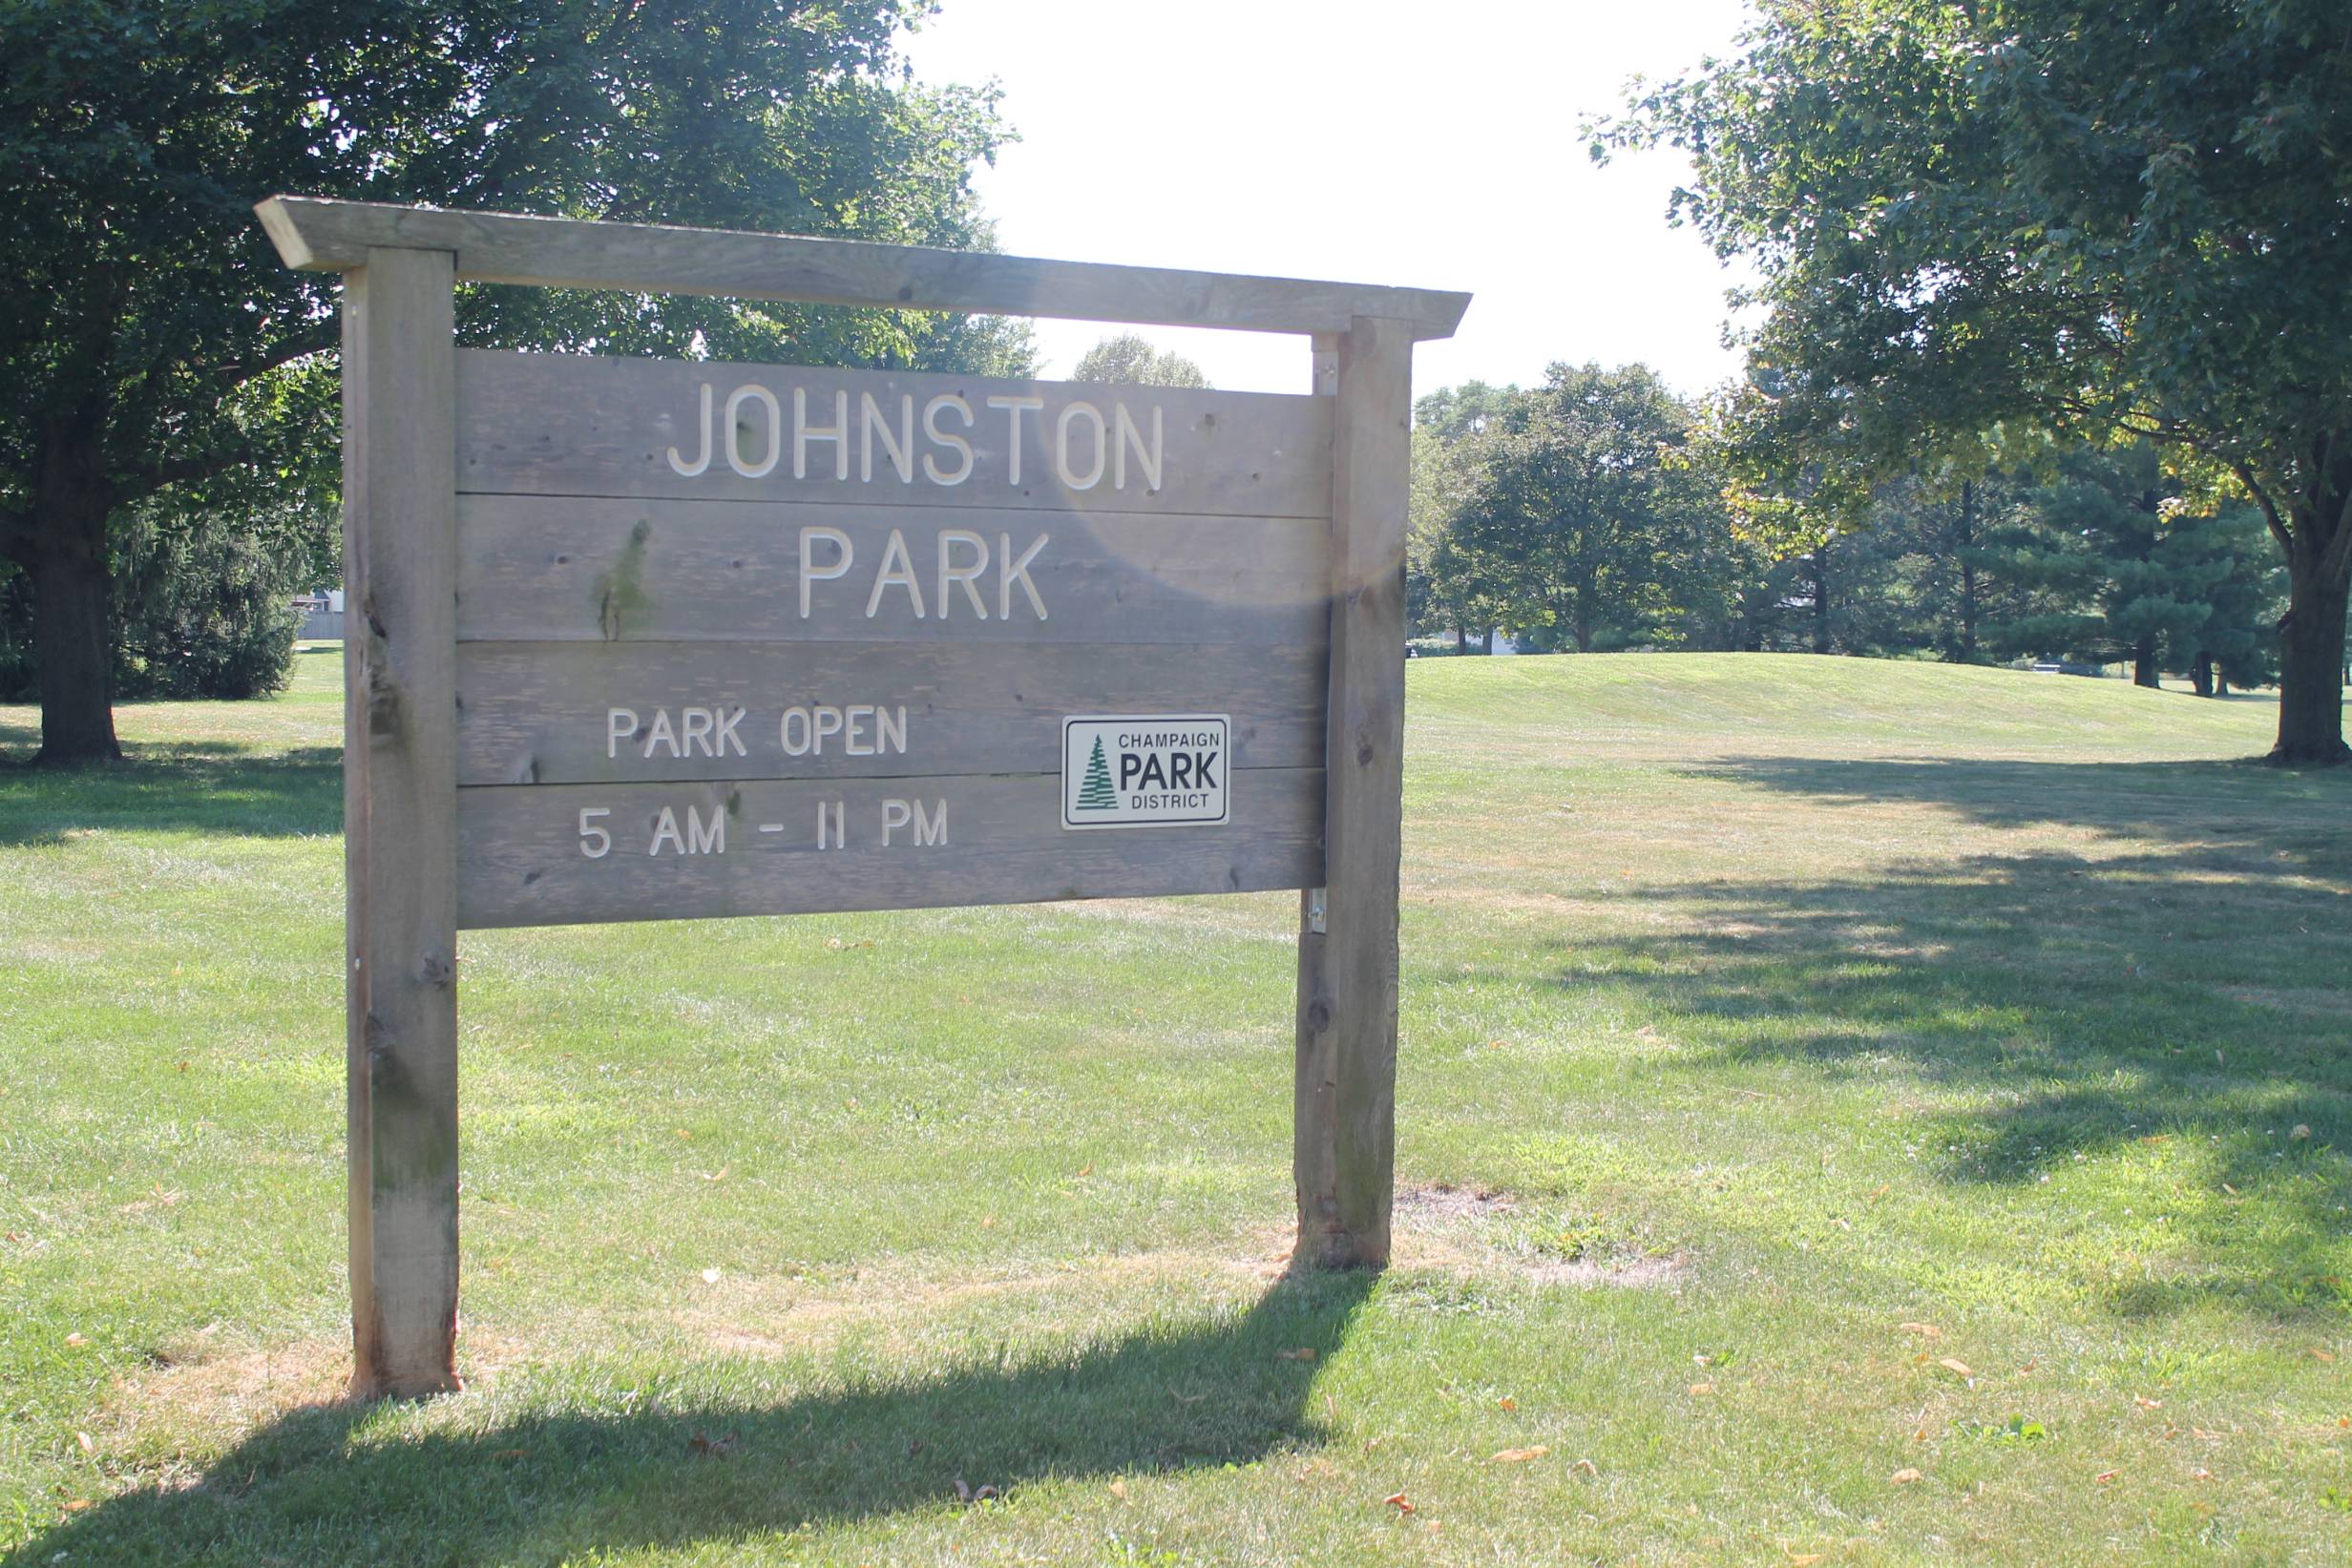 A park district sign that designates this Johnston Park. Photo by Maddie Rice.